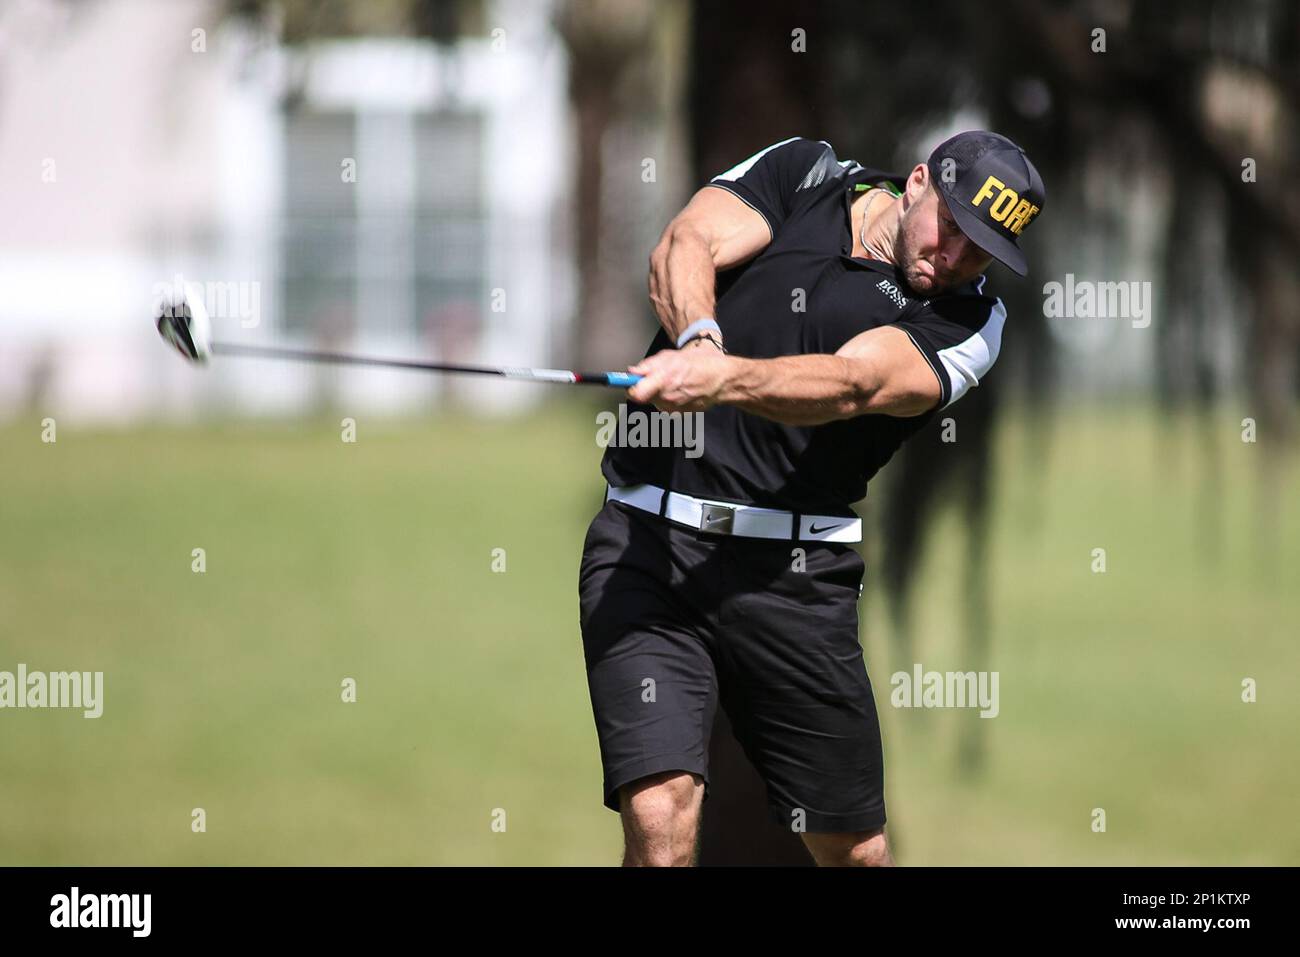 March 12, 2016: Tim Tebow muscles a tee shot on the second hole during the Tim  Tebow Foundation Celebrity Golf Classic at the TPC Sawgrass Stadium Course  in Ponte Vedra Beach,Fl. (photo